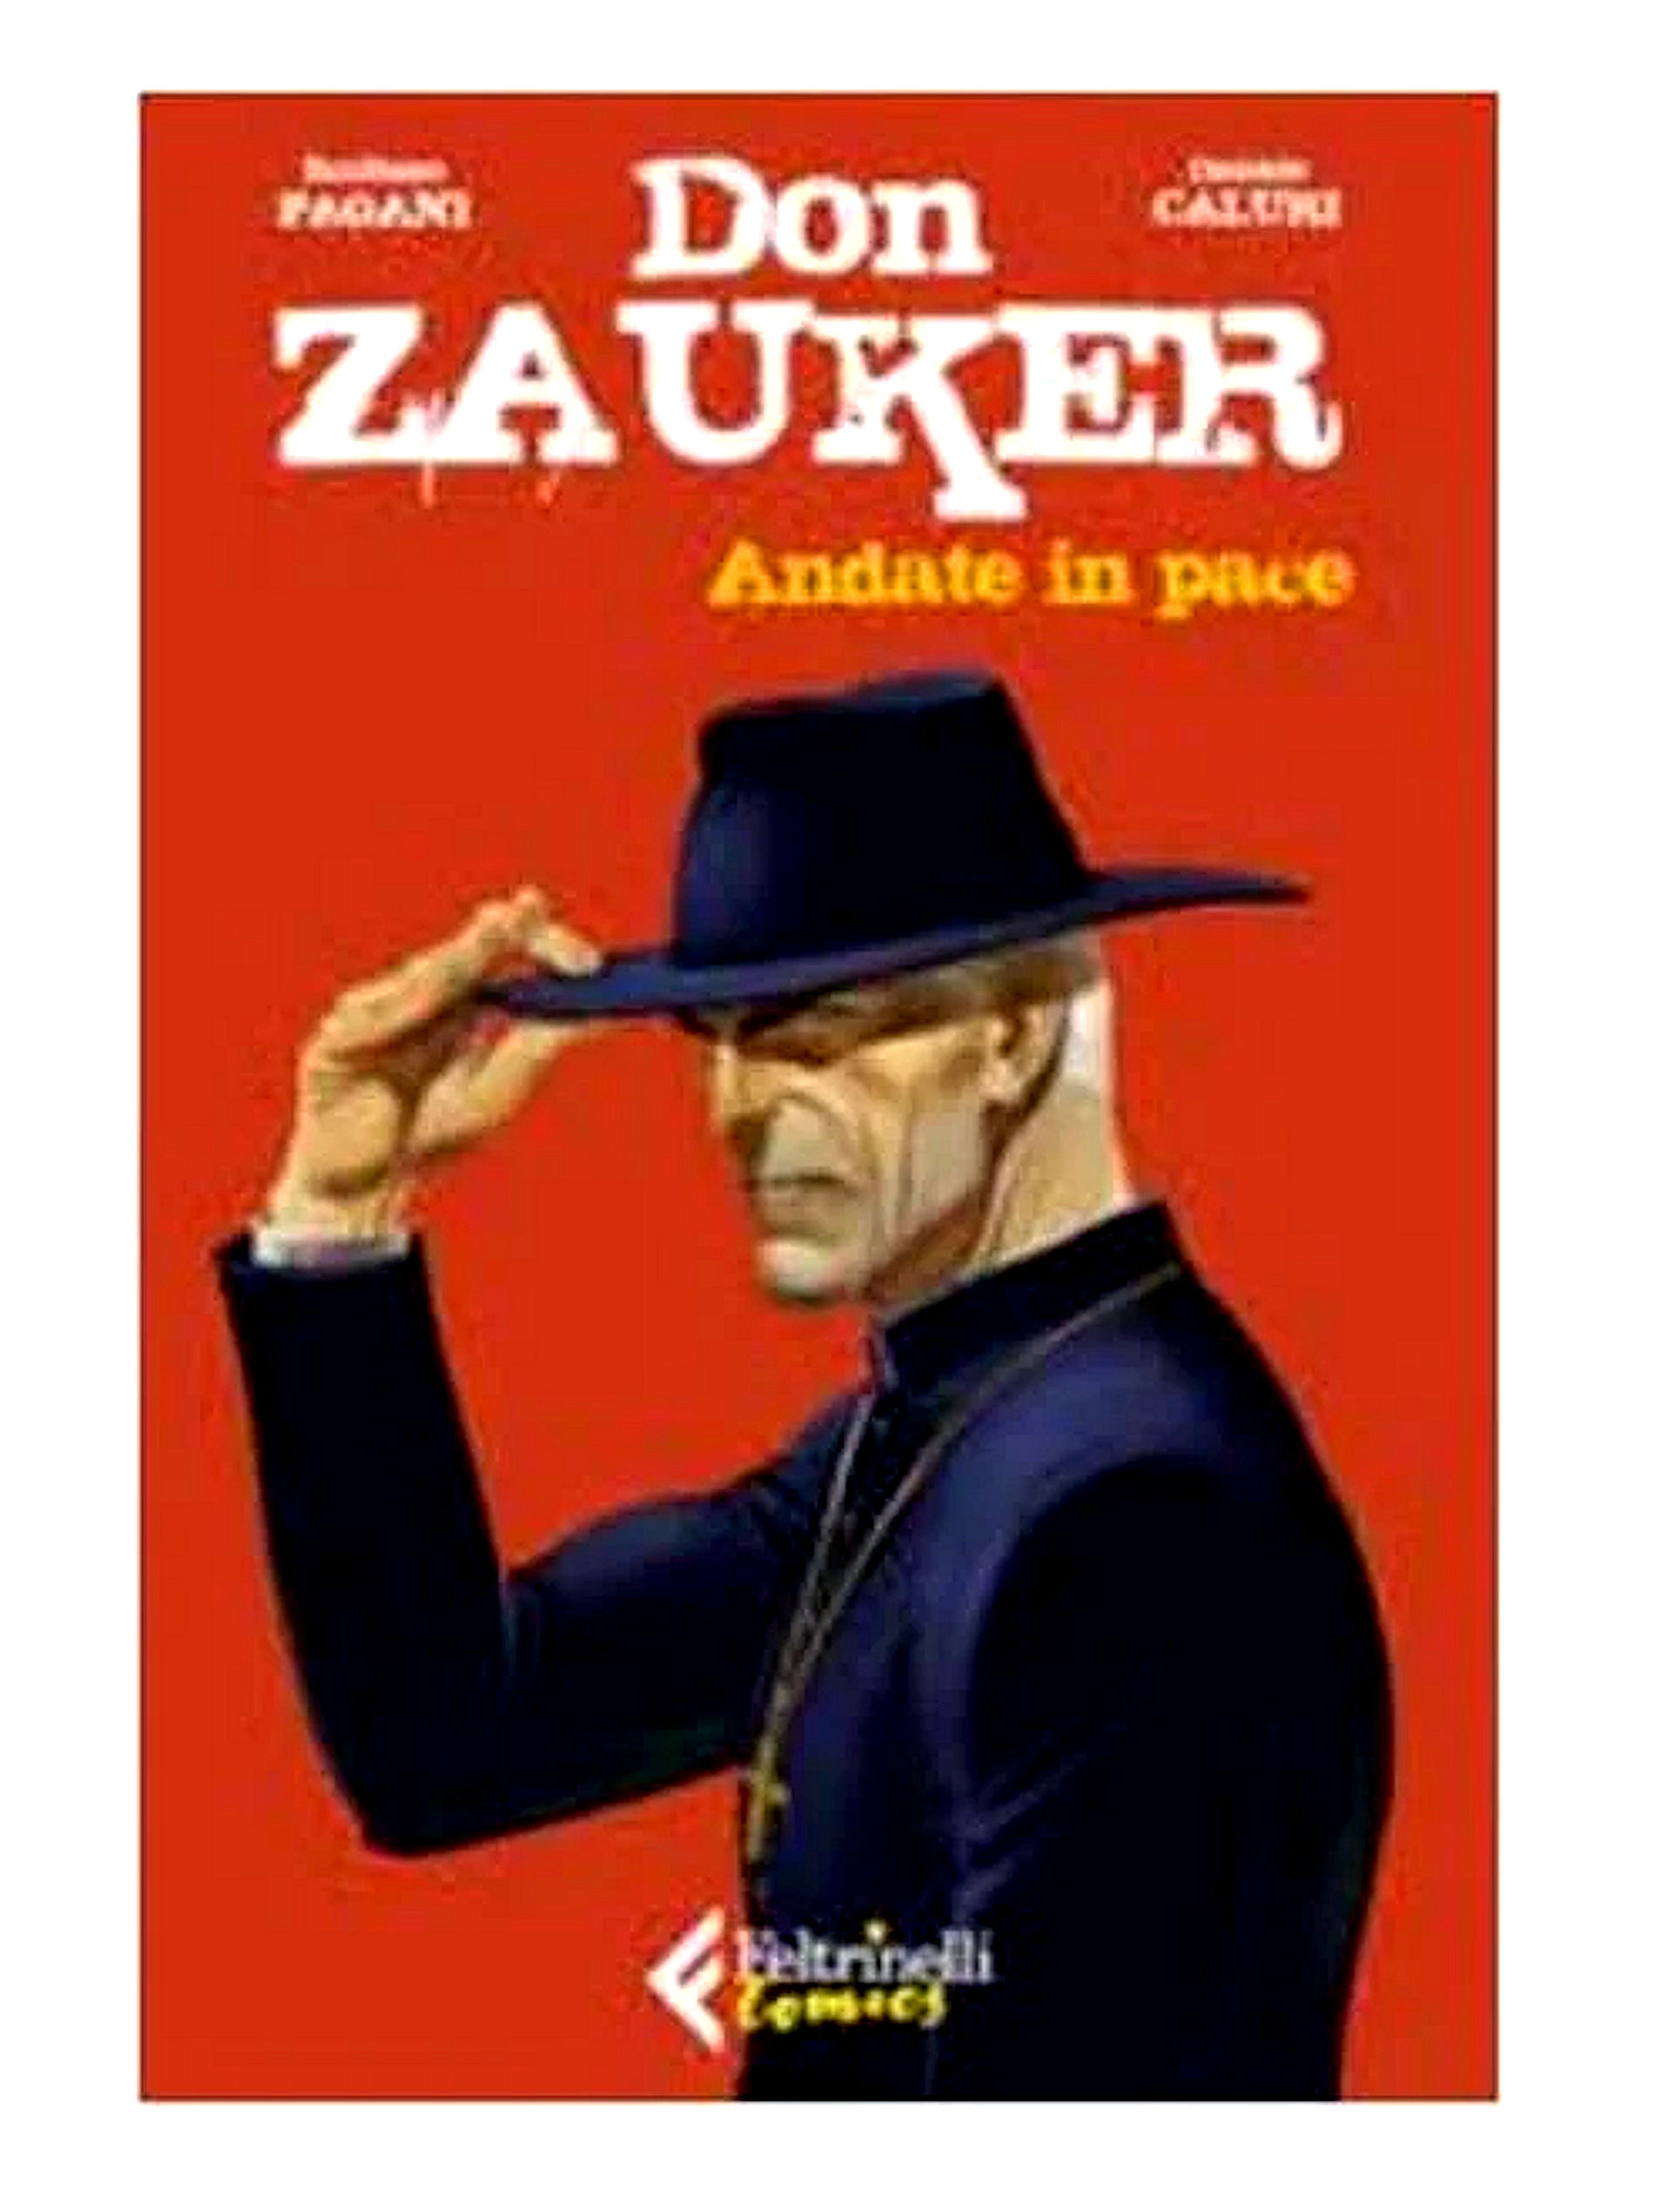 Don Zauker. Andate In Pace